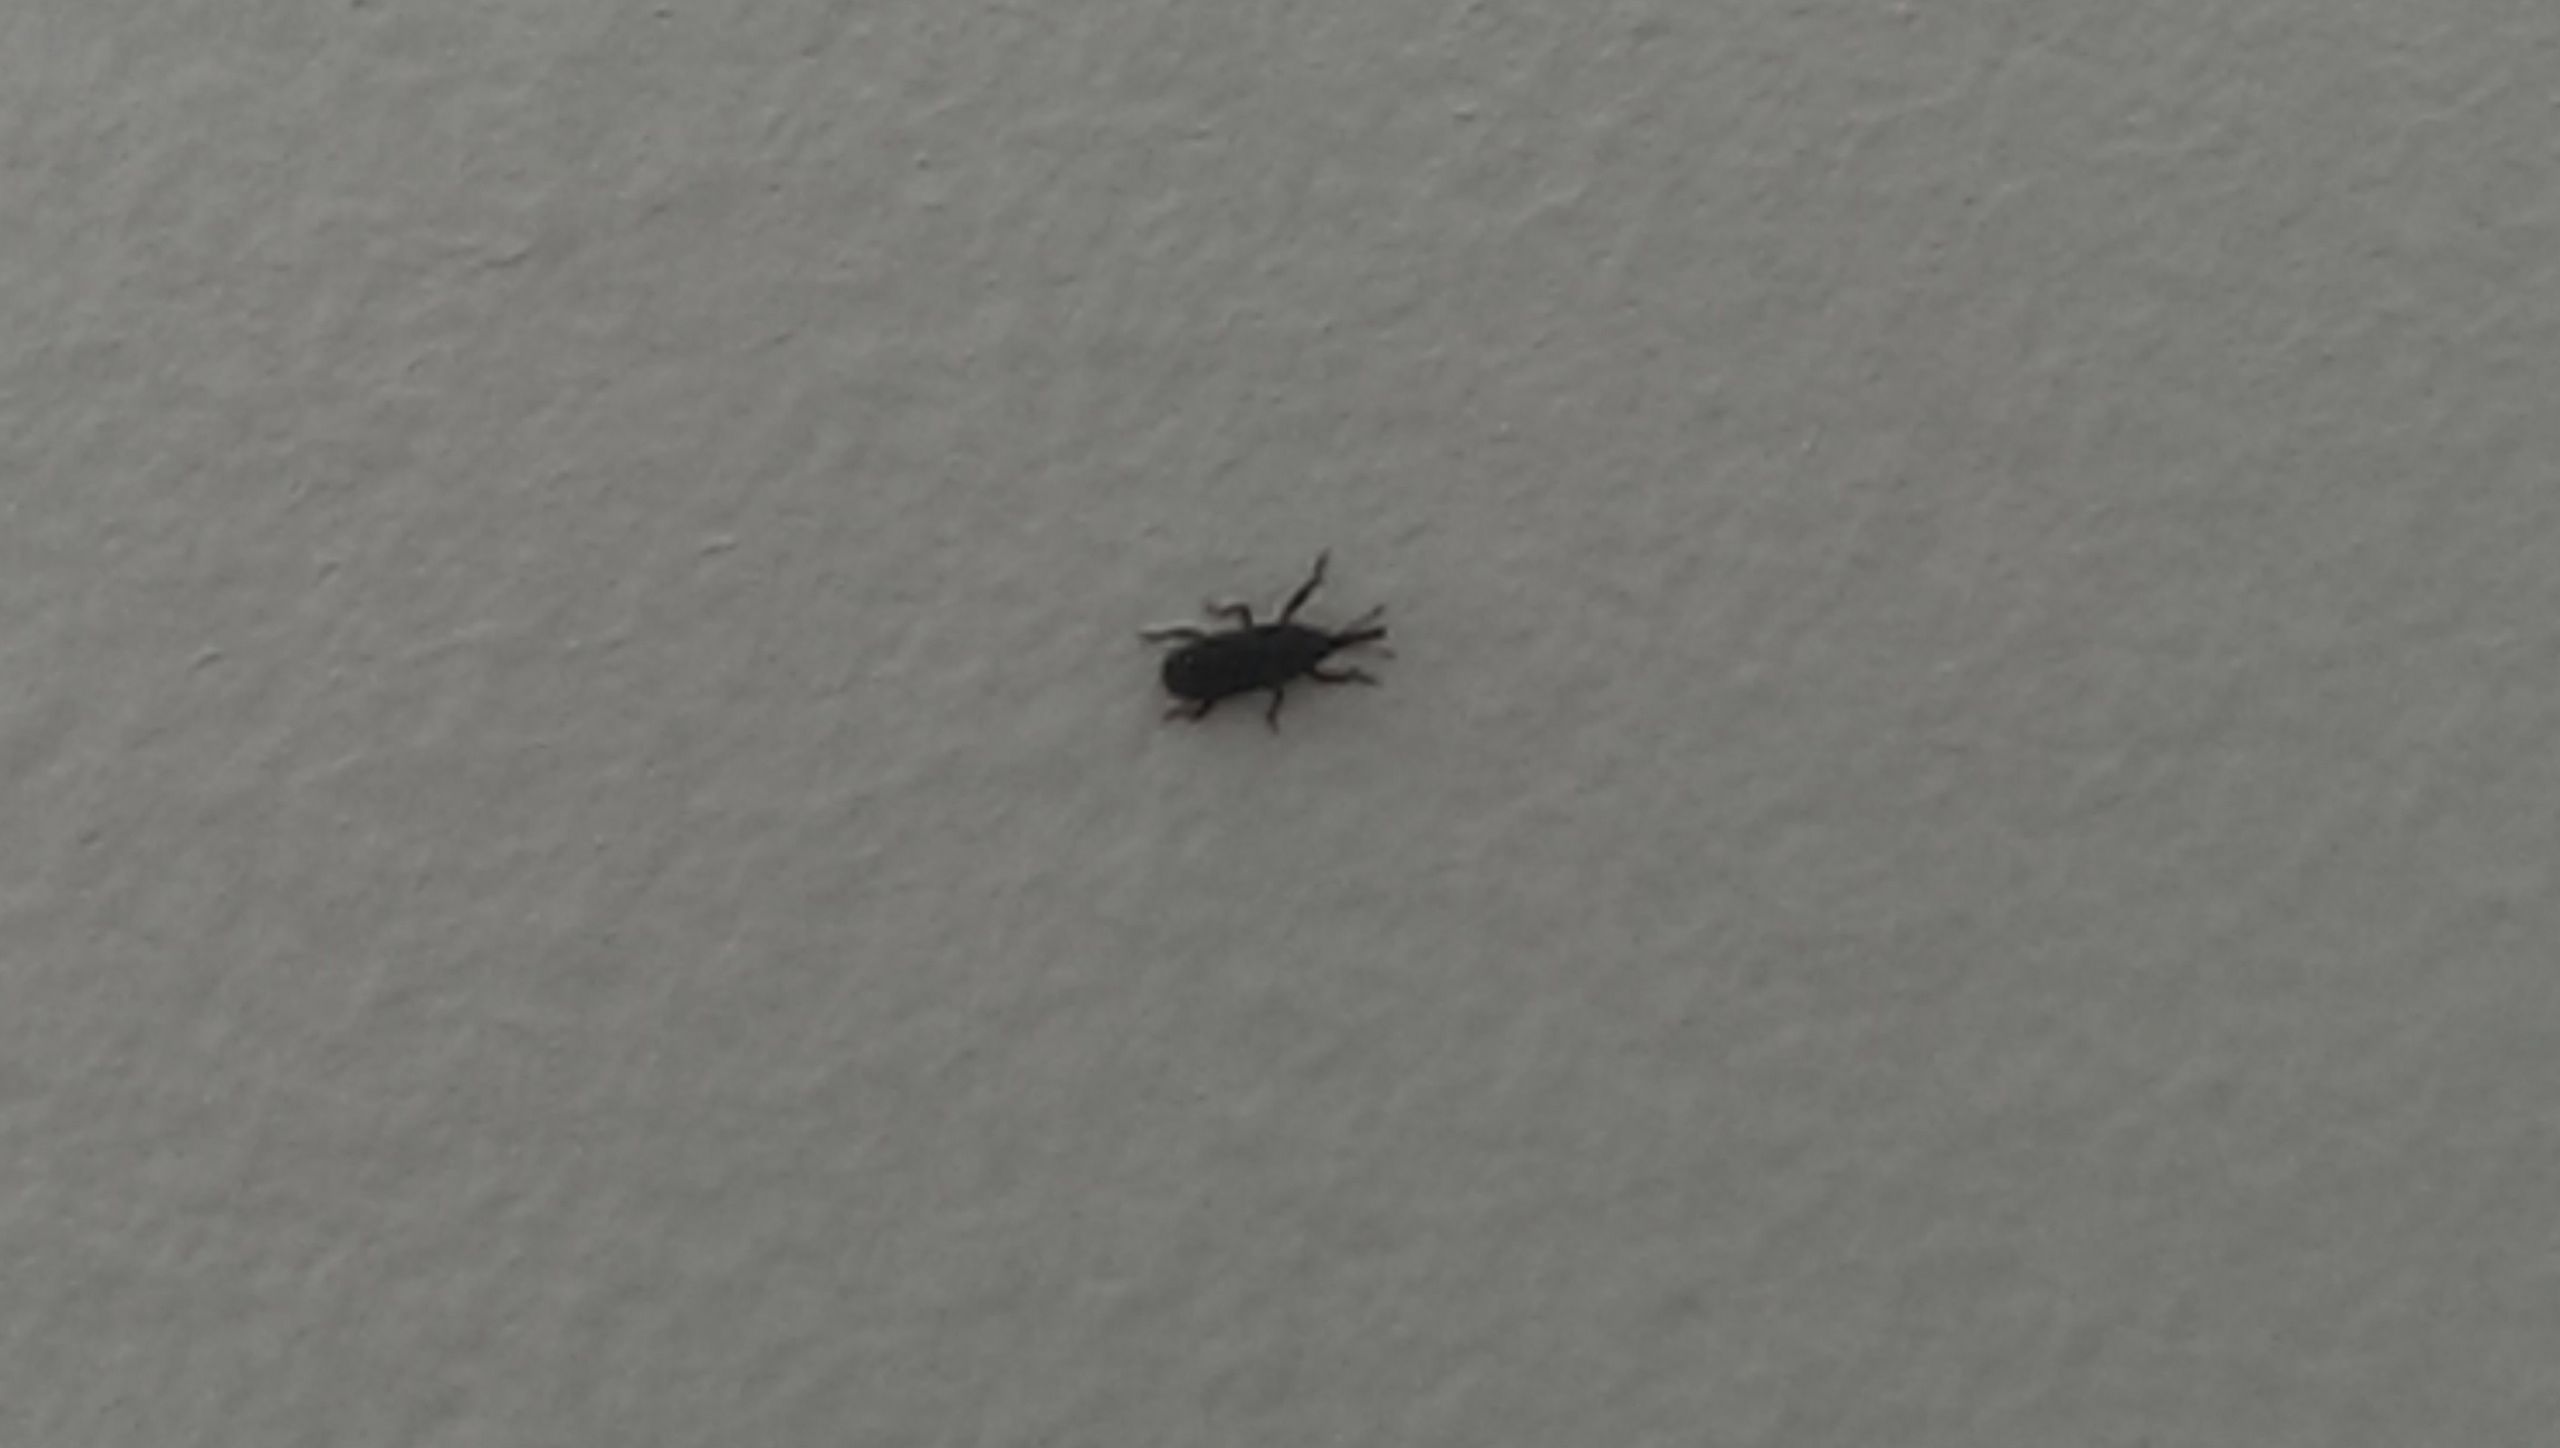 Small Black Flies In Bathroom
 Trying to identify black ant like bugs found occasionally